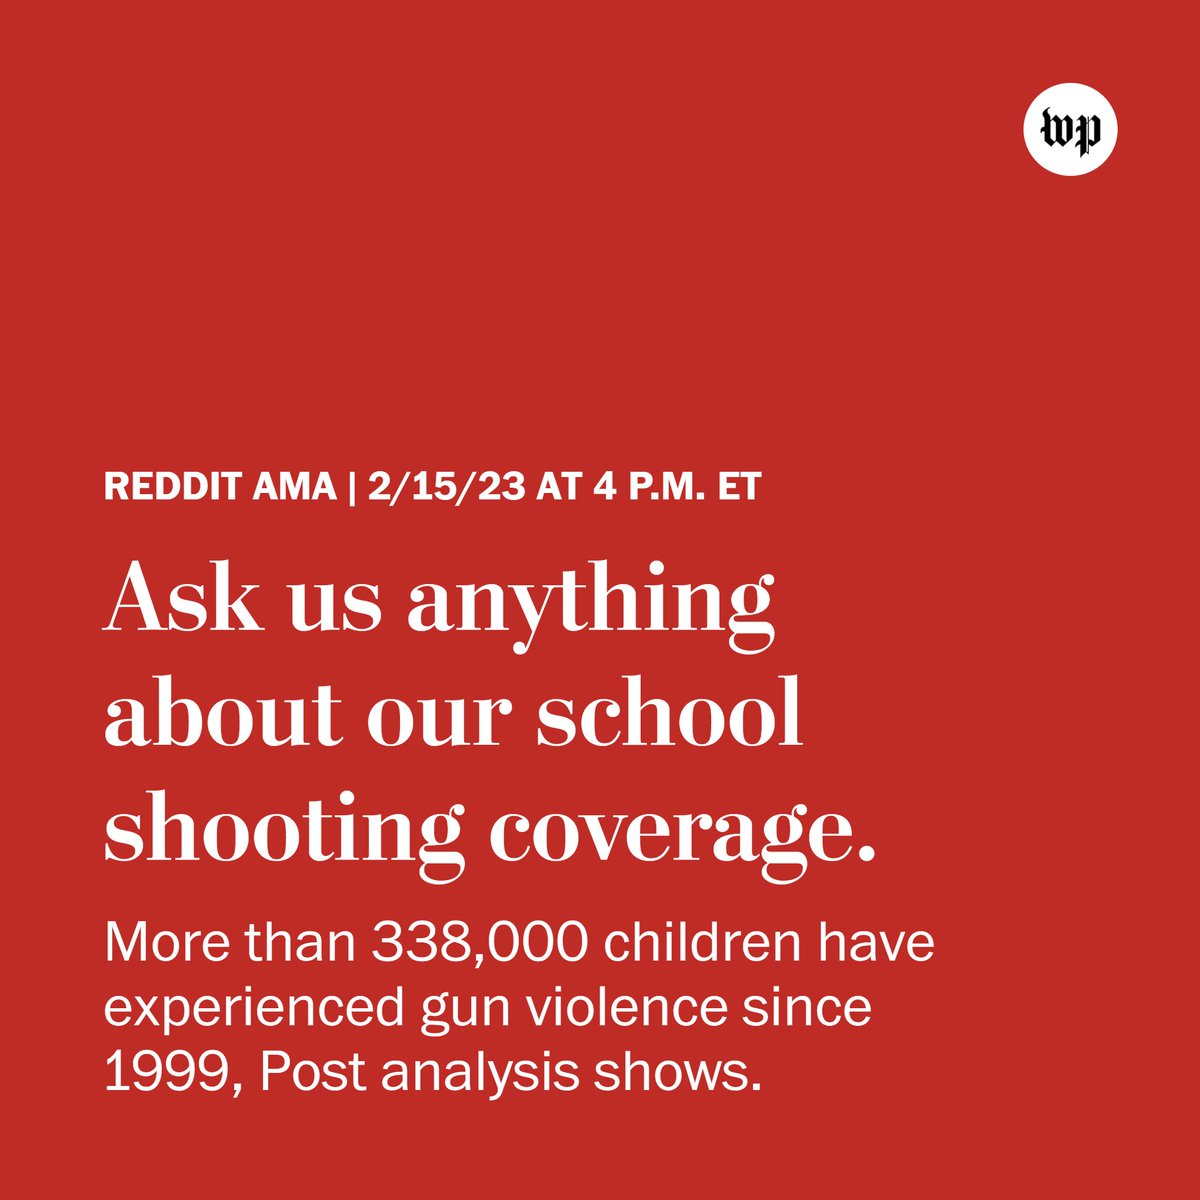 For the last five years, reporters @JohnWoodrowCox and @dataeditor have been maintaining a unique database that tracks the total number of children exposed to gun violence at school. Learn more about their findings today at 4 p.m. ET on Reddit: redd.it/1137rx6.